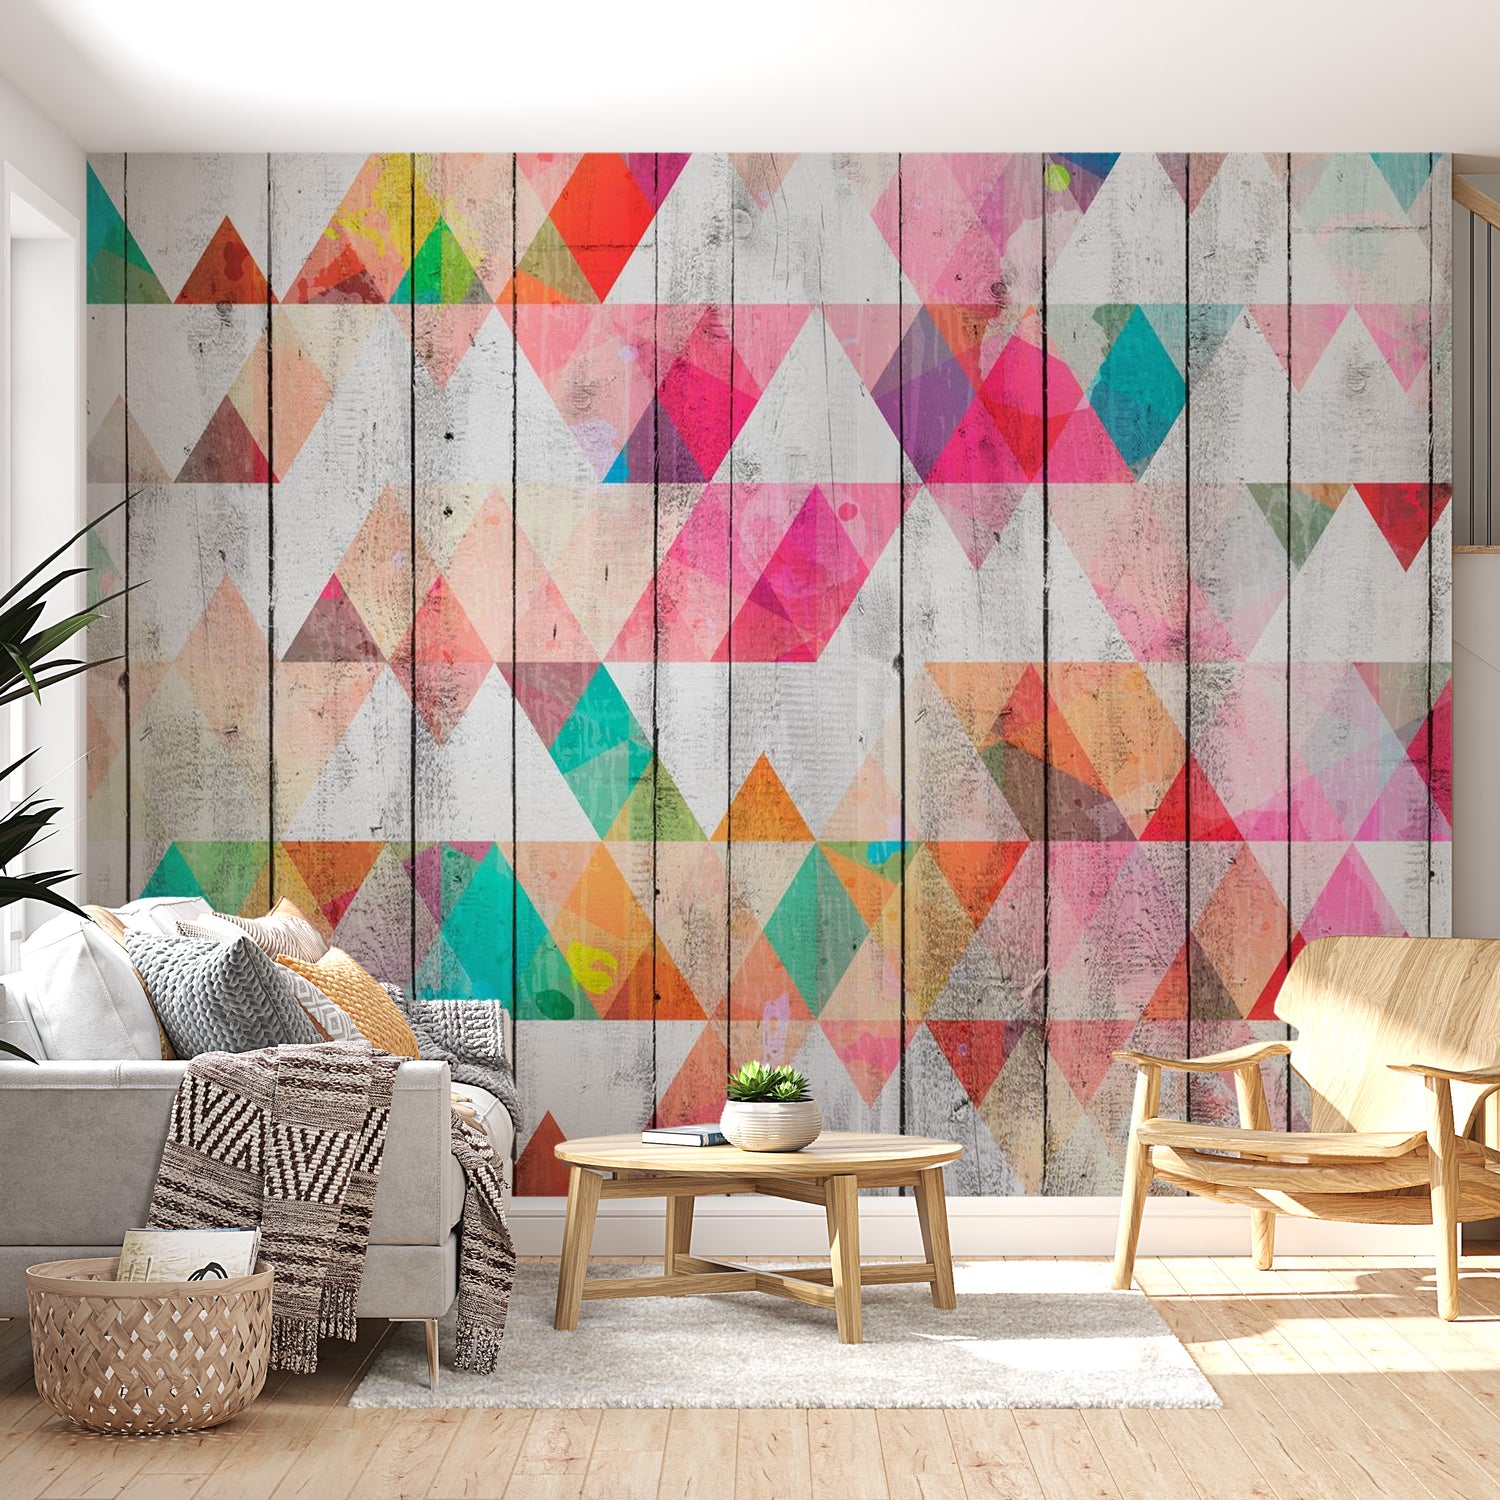 Background & Patterns Wallpaper Wall Mural - Rainbow Triangles on Wood